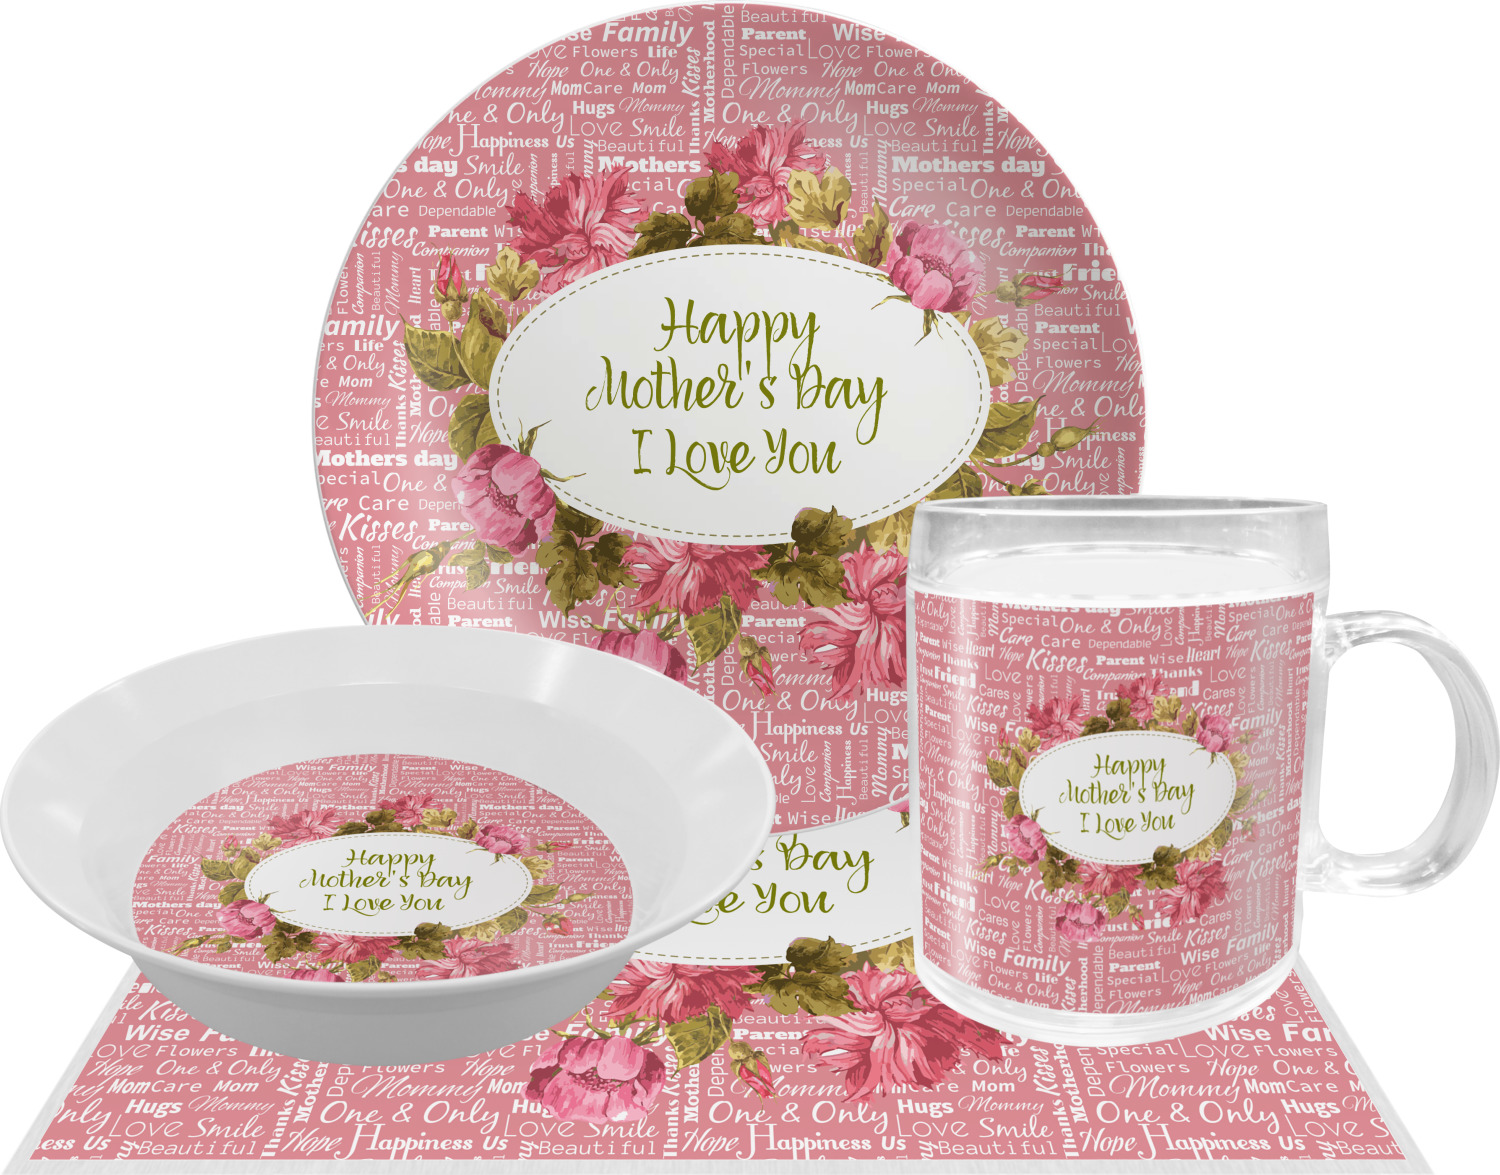 https://www.youcustomizeit.com/common/MAKE/589114/Mother-Day-Dinner-Set-4-Pc-Personalized.jpg?lm=1659811948